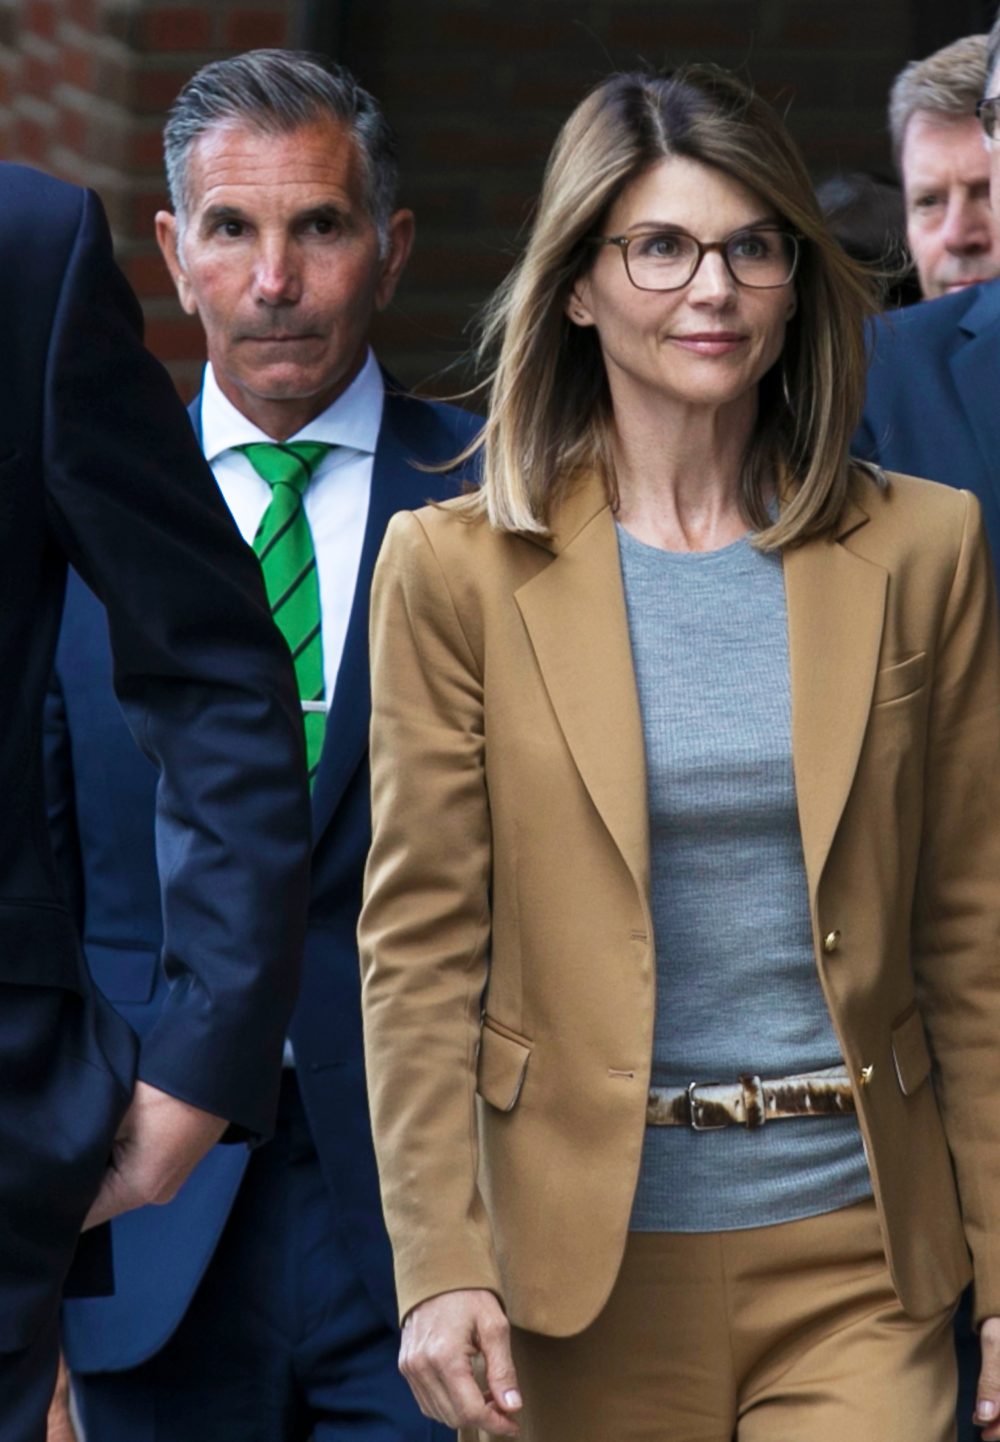 Lori Loughlin and Mossimo Giannulli Resign From Country Club Amid Scandal